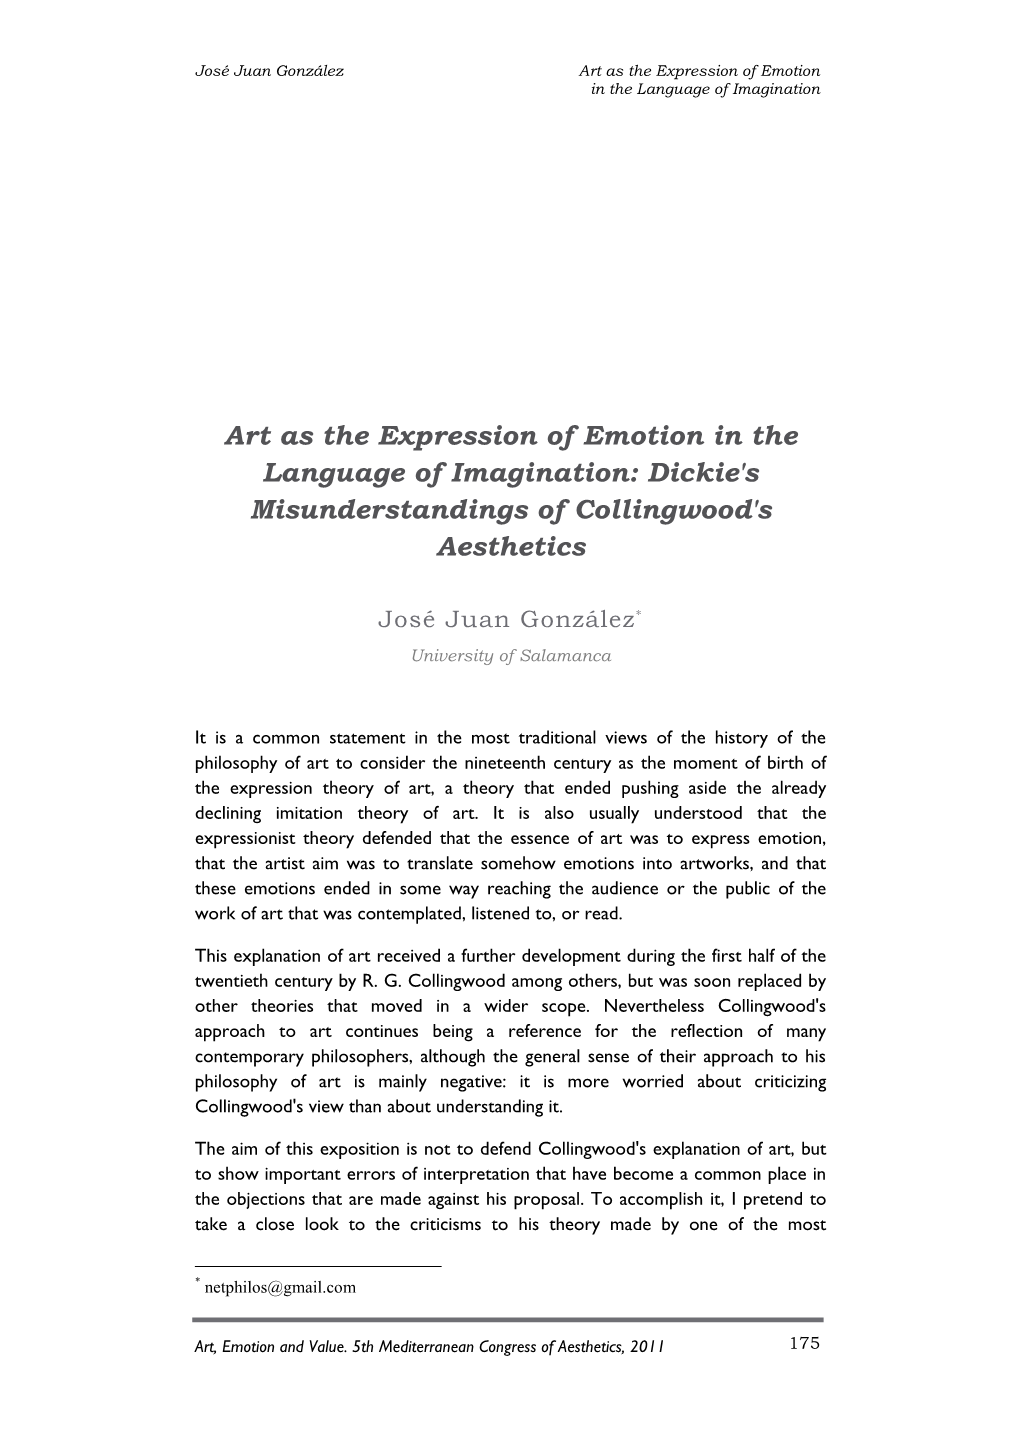 Art As the Expression of Emotion in the Language of Imagination: Dickie's Misunderstandings of Collingwood's Aesthetics